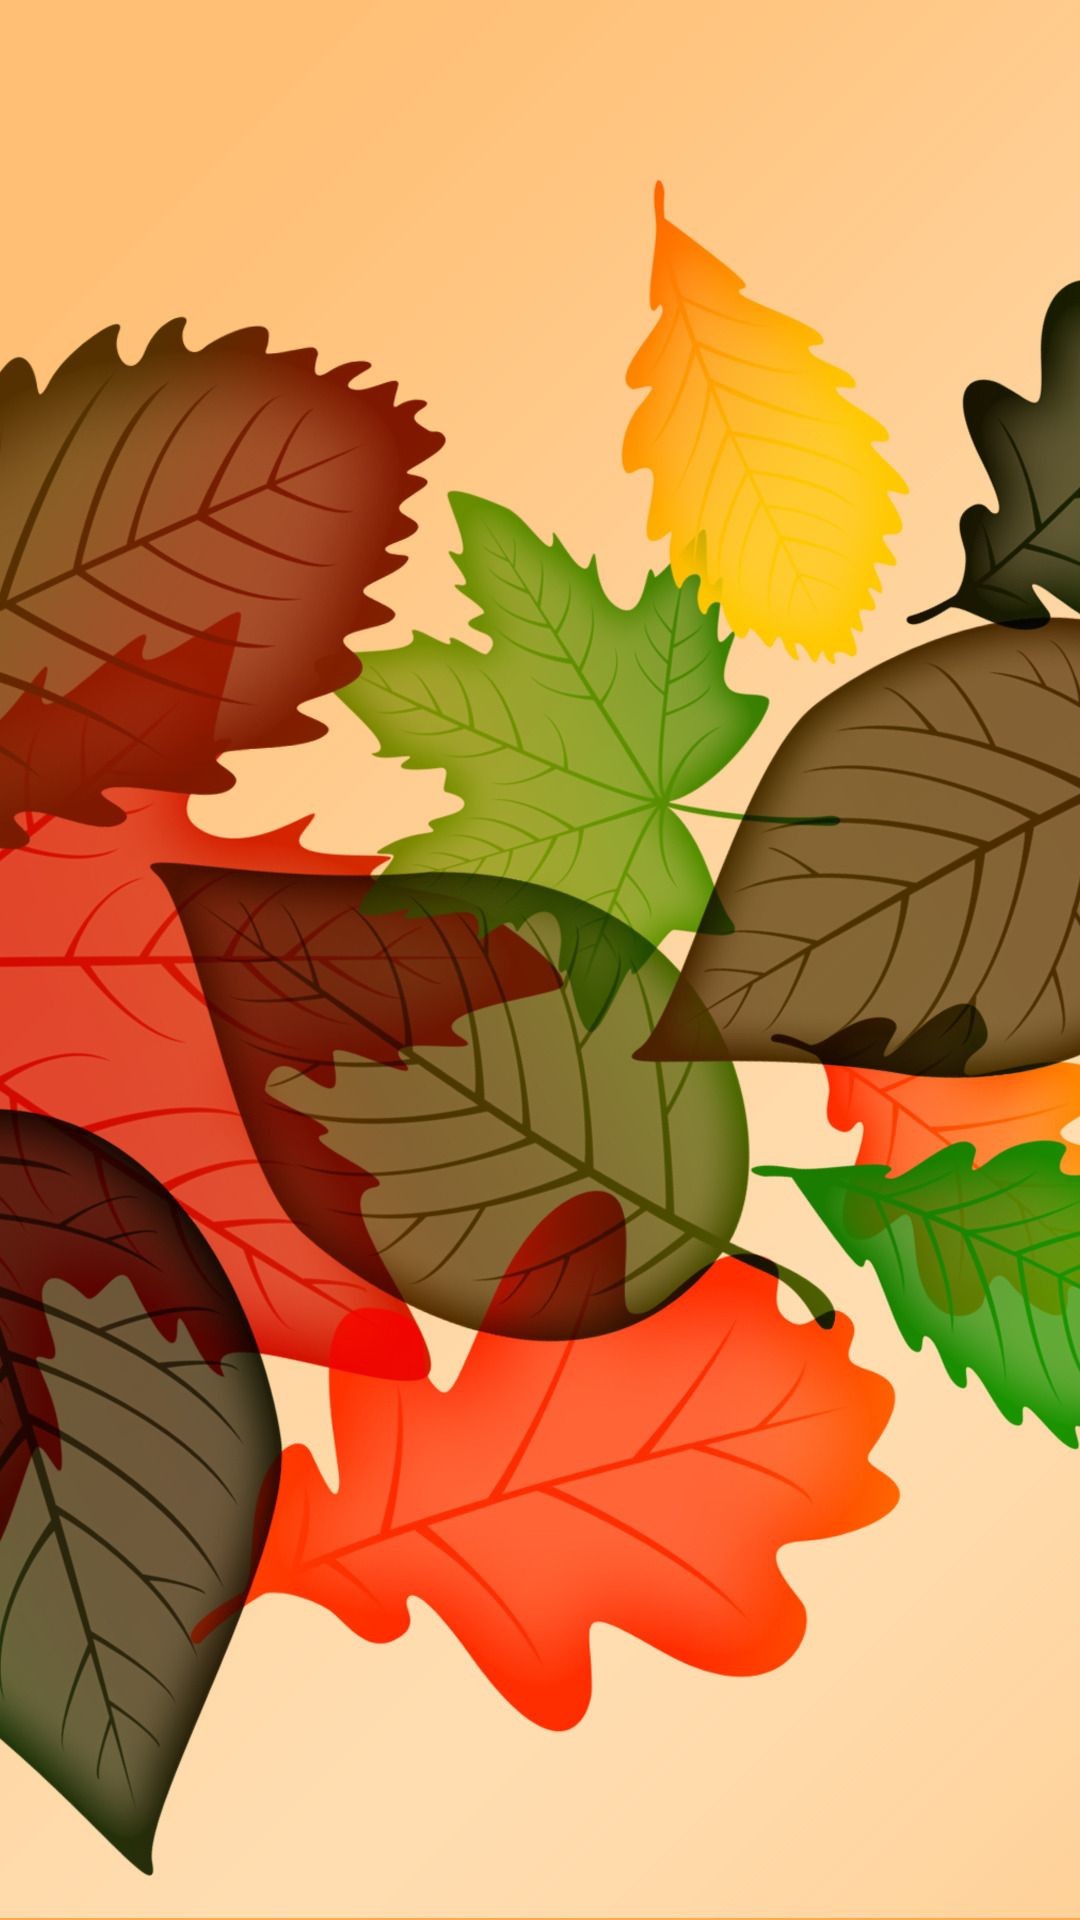 Autumn Leaves – Tap to see more of the top colorful Autumn wallpapers! | @